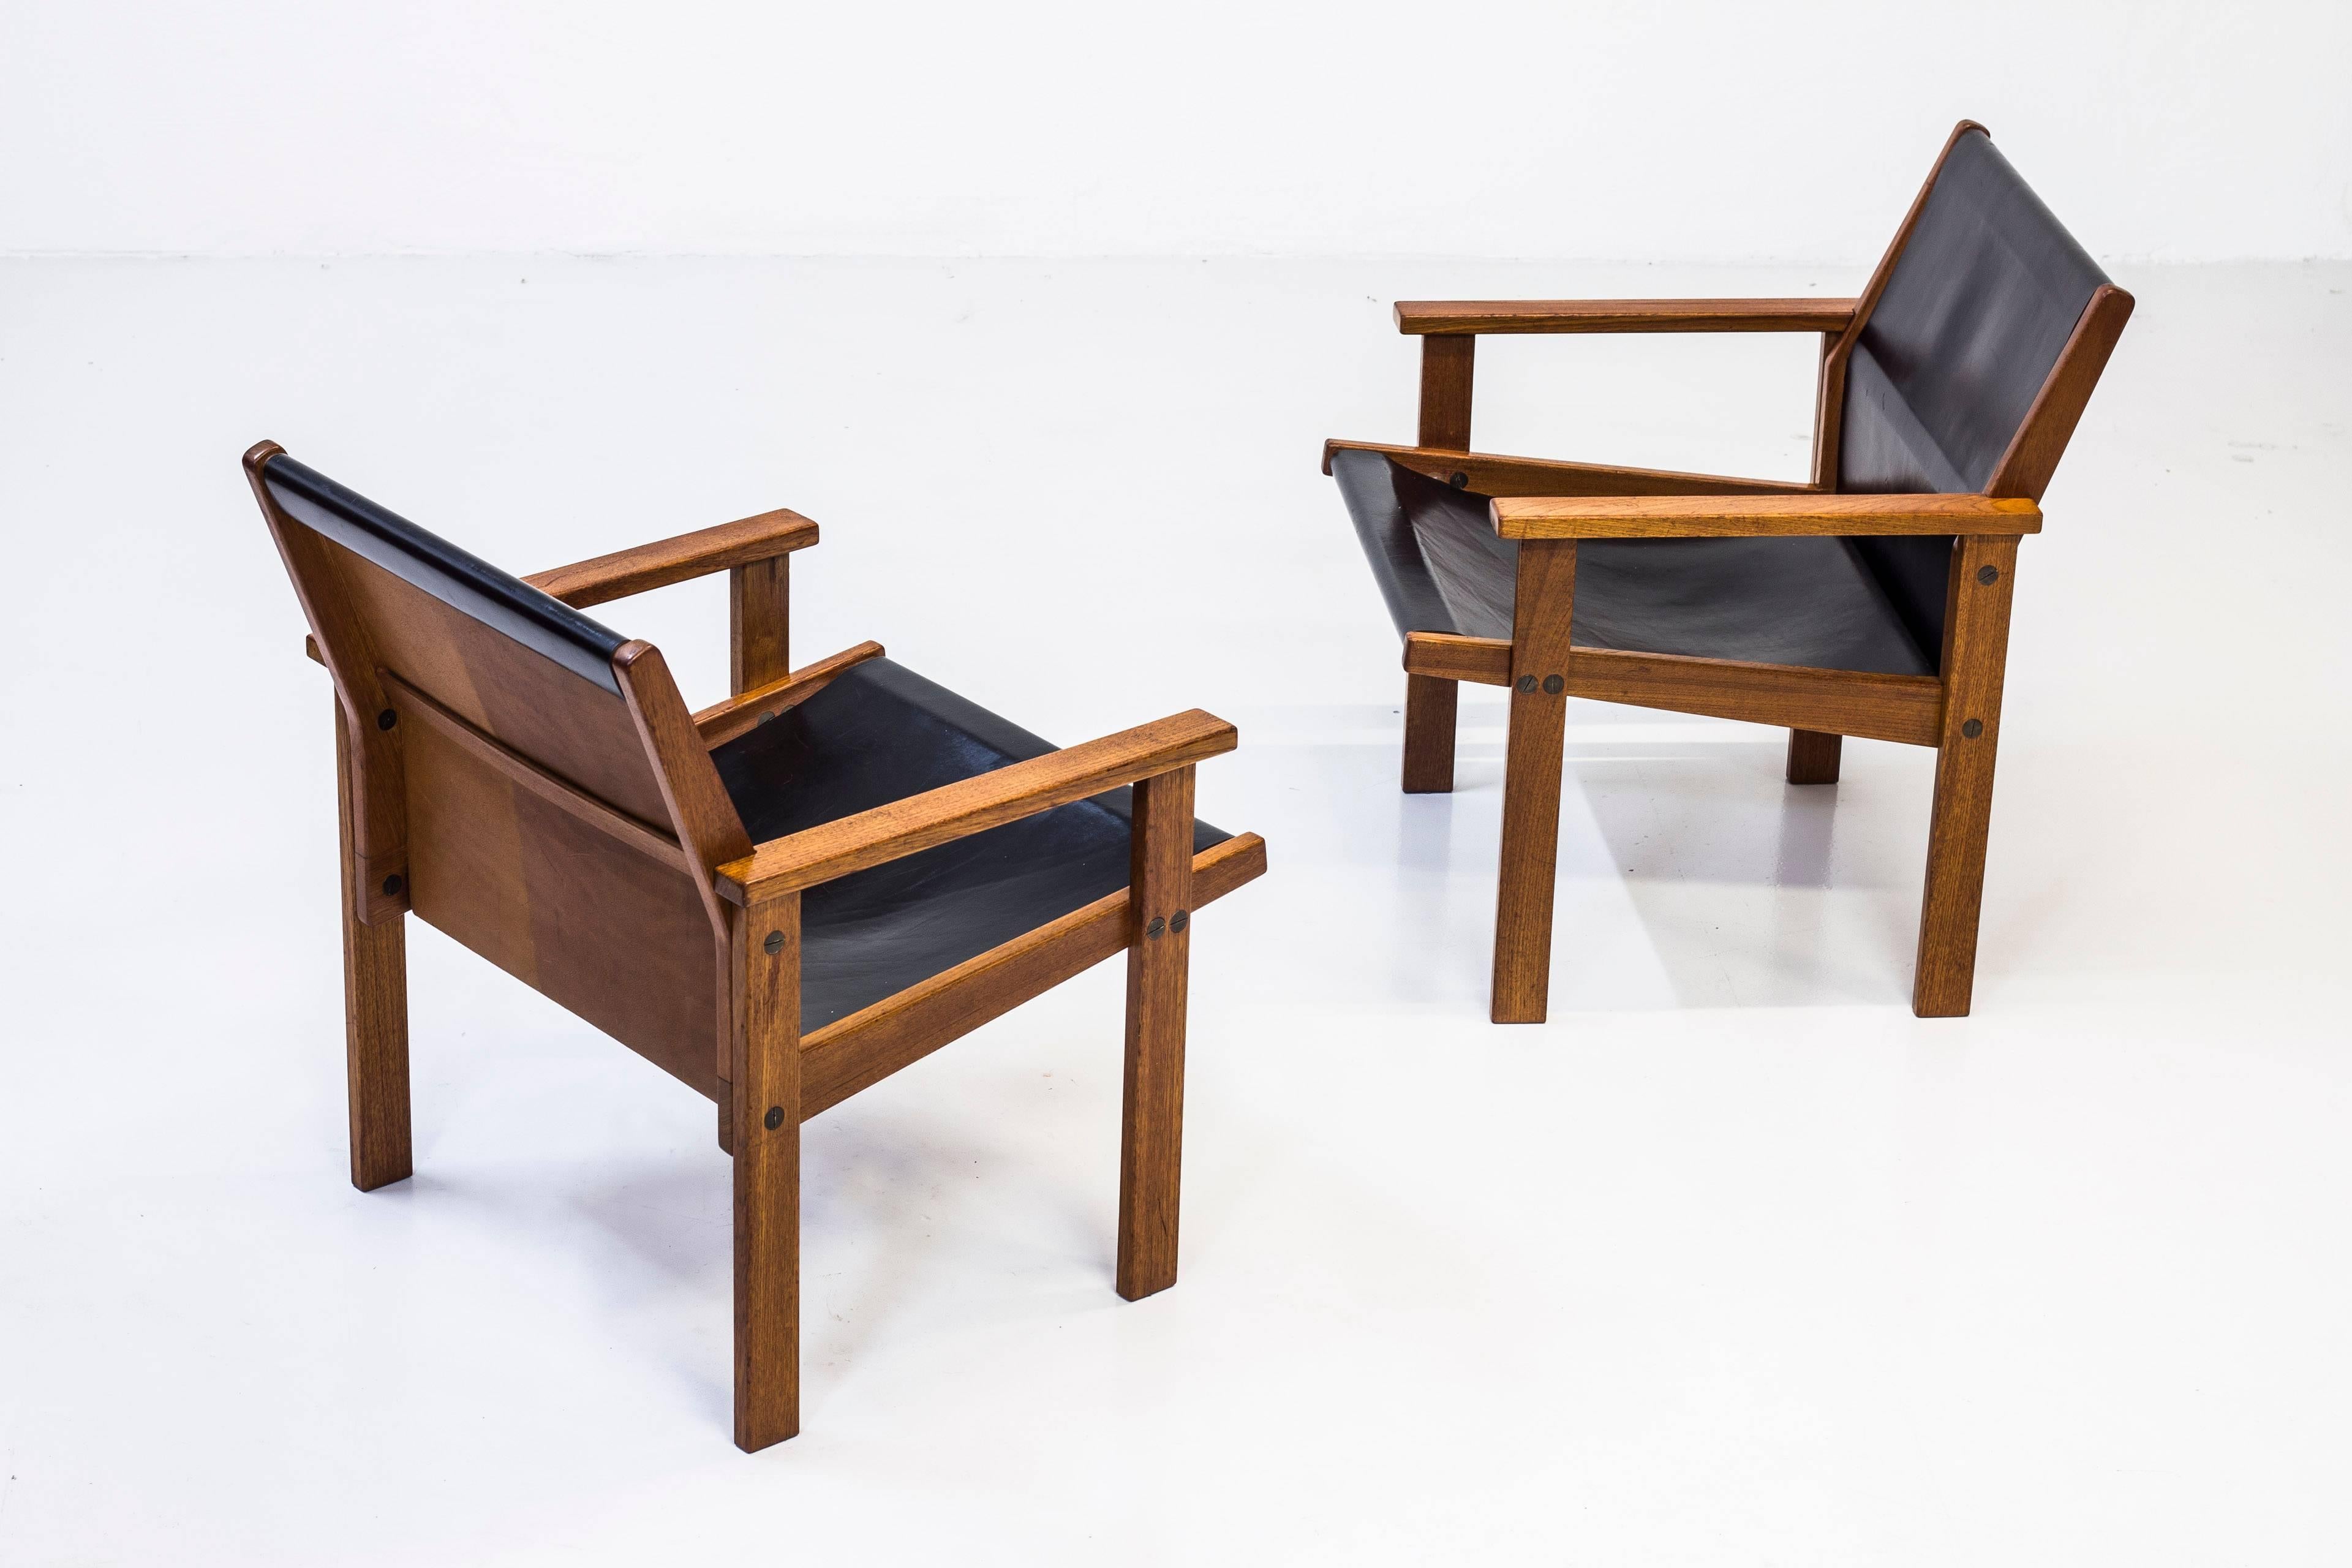 Rare easy chairs designed by Hans-Agne Jakobsson. Made by Cabinetmaker Bertil Johansson in Markaryd Sweden in 1976. Made from solid teak with thick leather seat and back rest. Nice oversized custom brass hardwear. very good original condition with